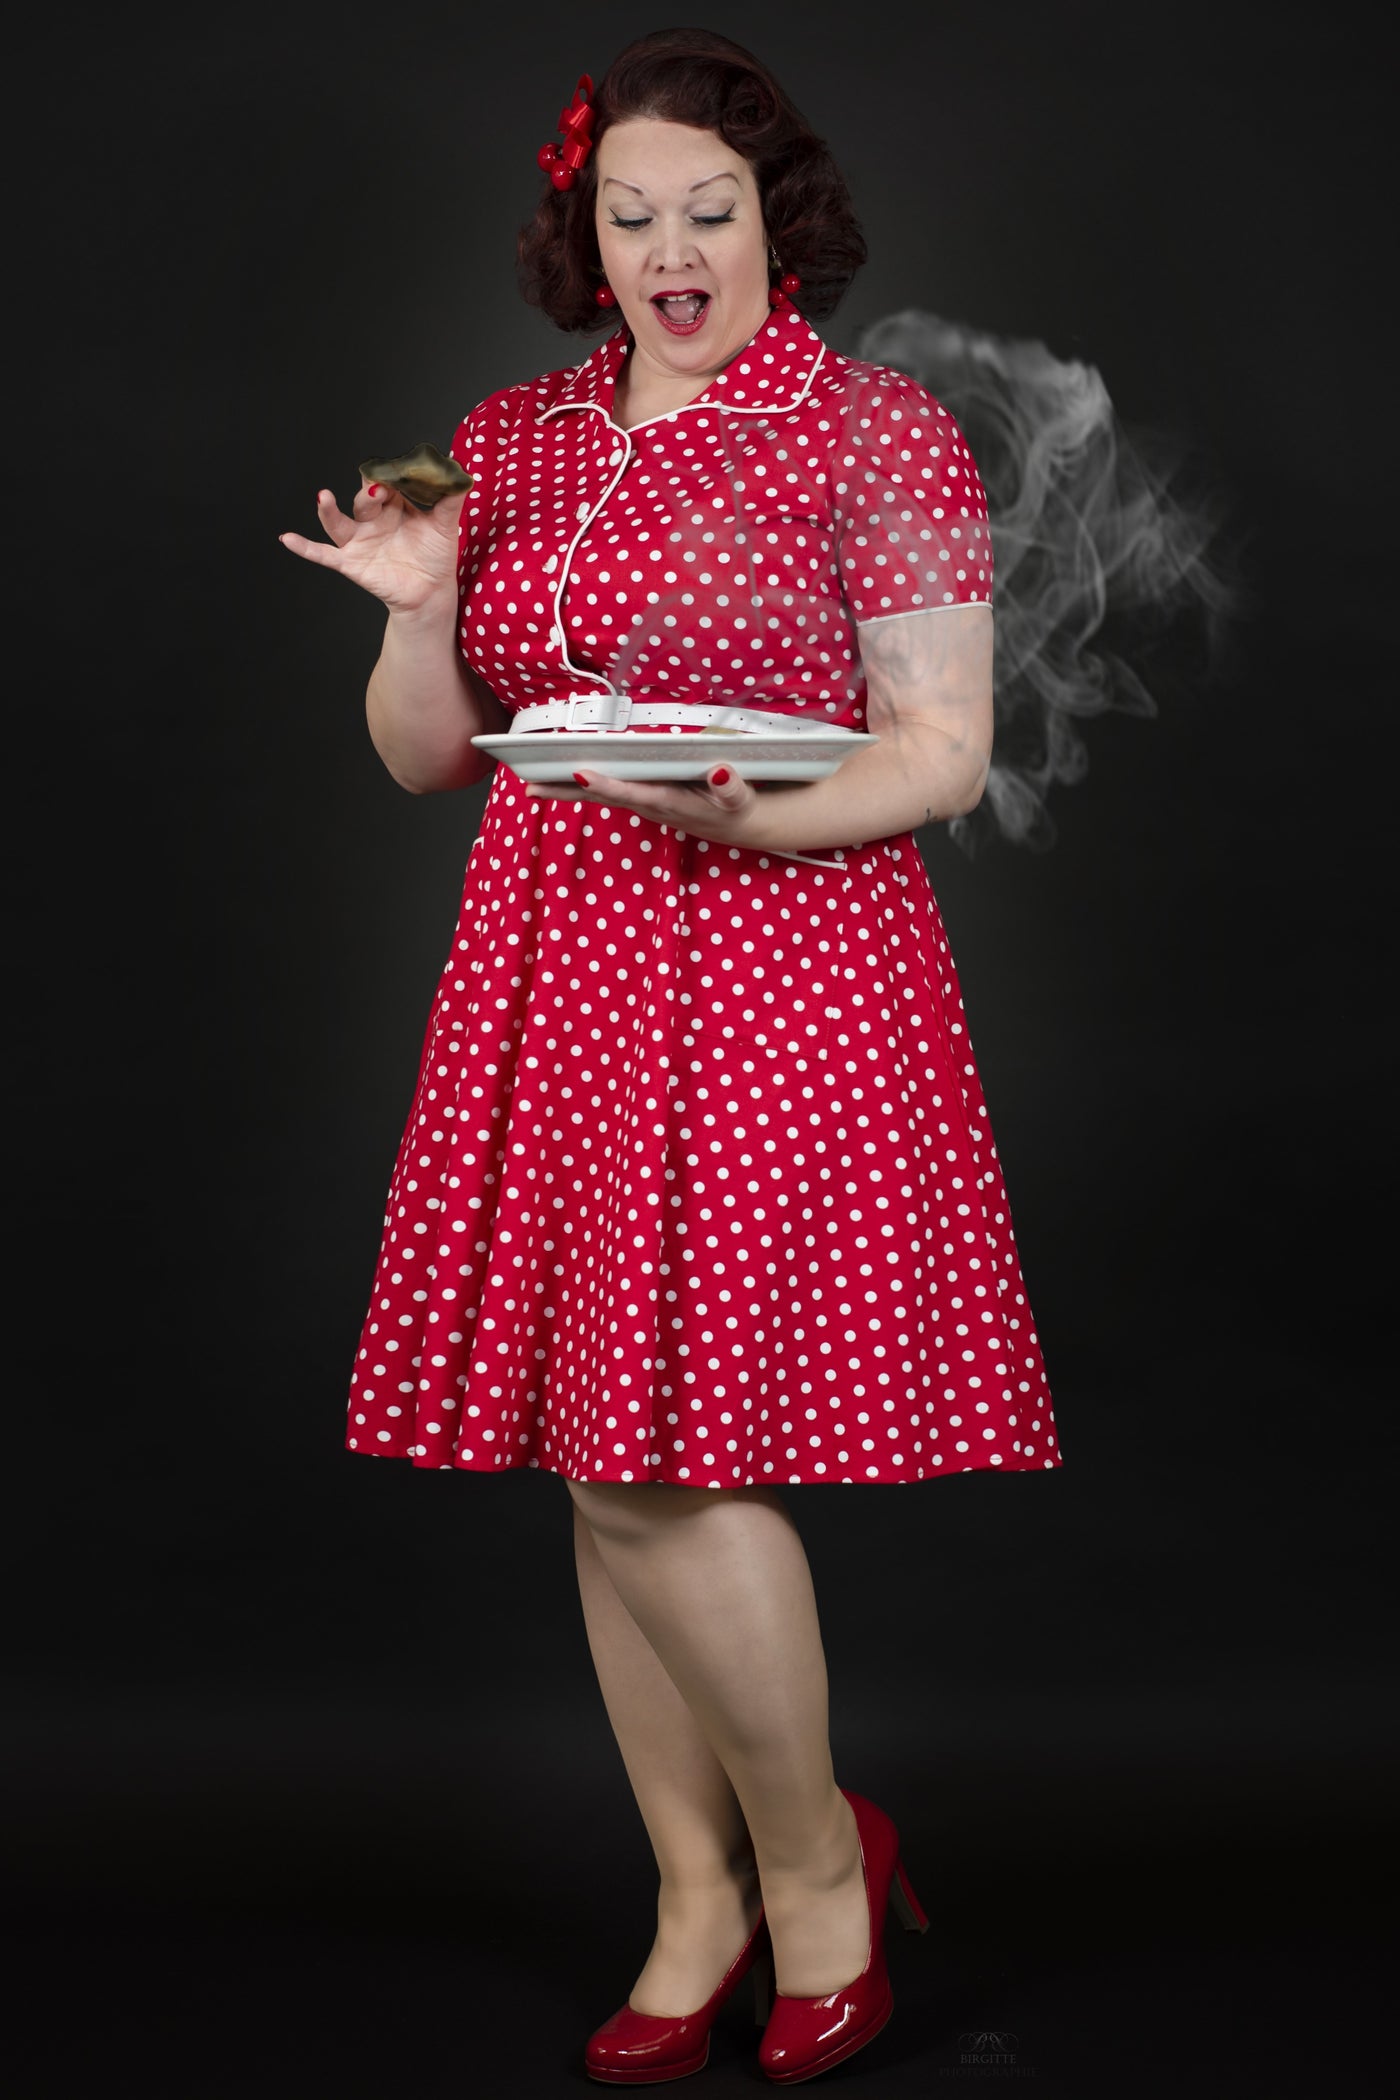 Women's Pin Up Style Shirt Dress In Classic Red & White Polka Dots